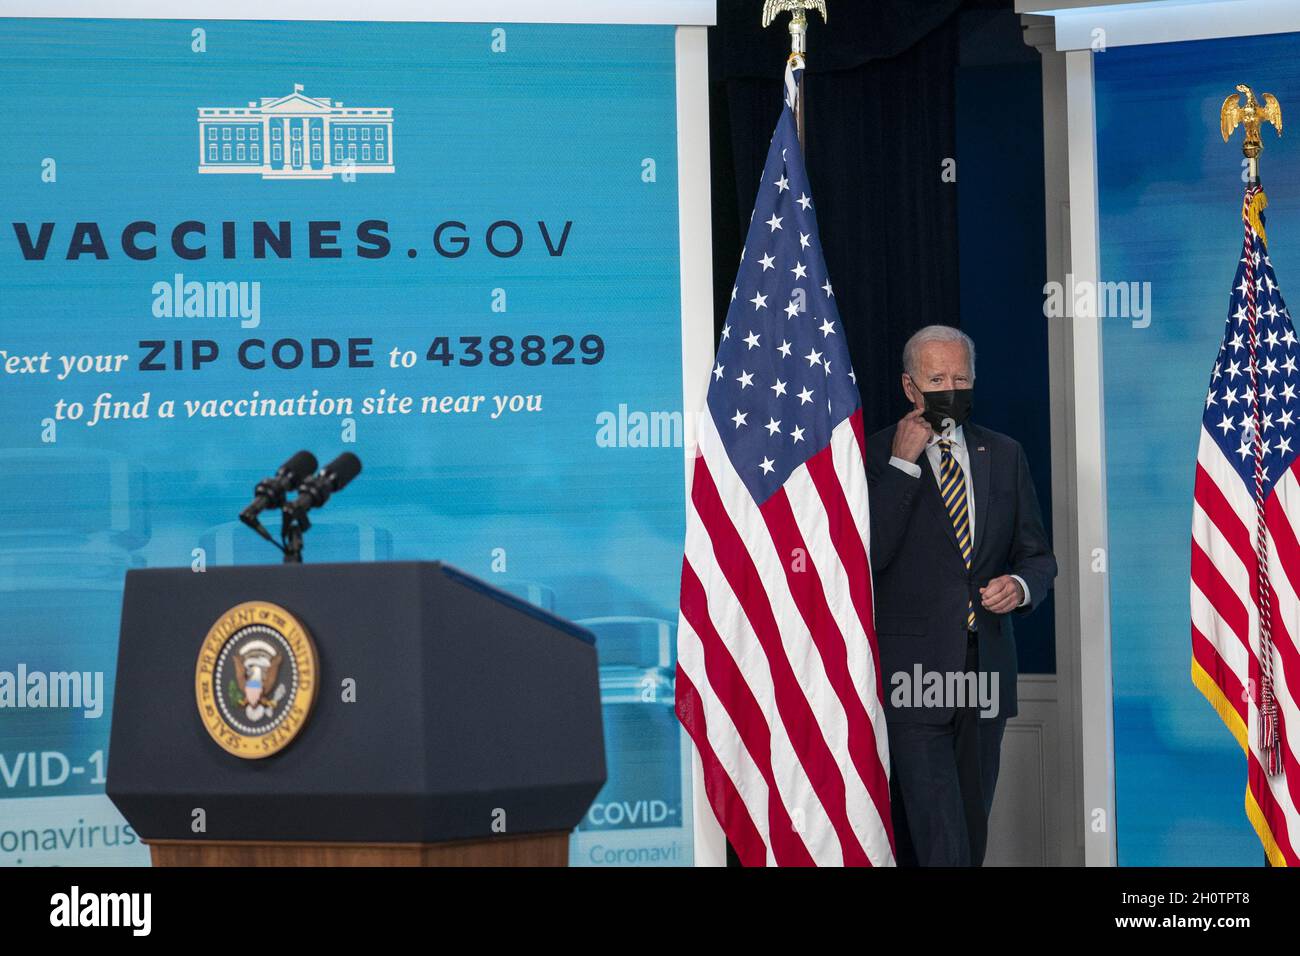 Washington, United States. 14th Oct, 2021. President Joe Biden arrives to deliver remarks on the administration's coronavirus response and the vaccination program from the Eisenhower Executive Office Building near the White House in Washington, DC on Thursday, October 14, 2021. Photo by Sarah Silbiger/UPI Credit: UPI/Alamy Live News Stock Photo